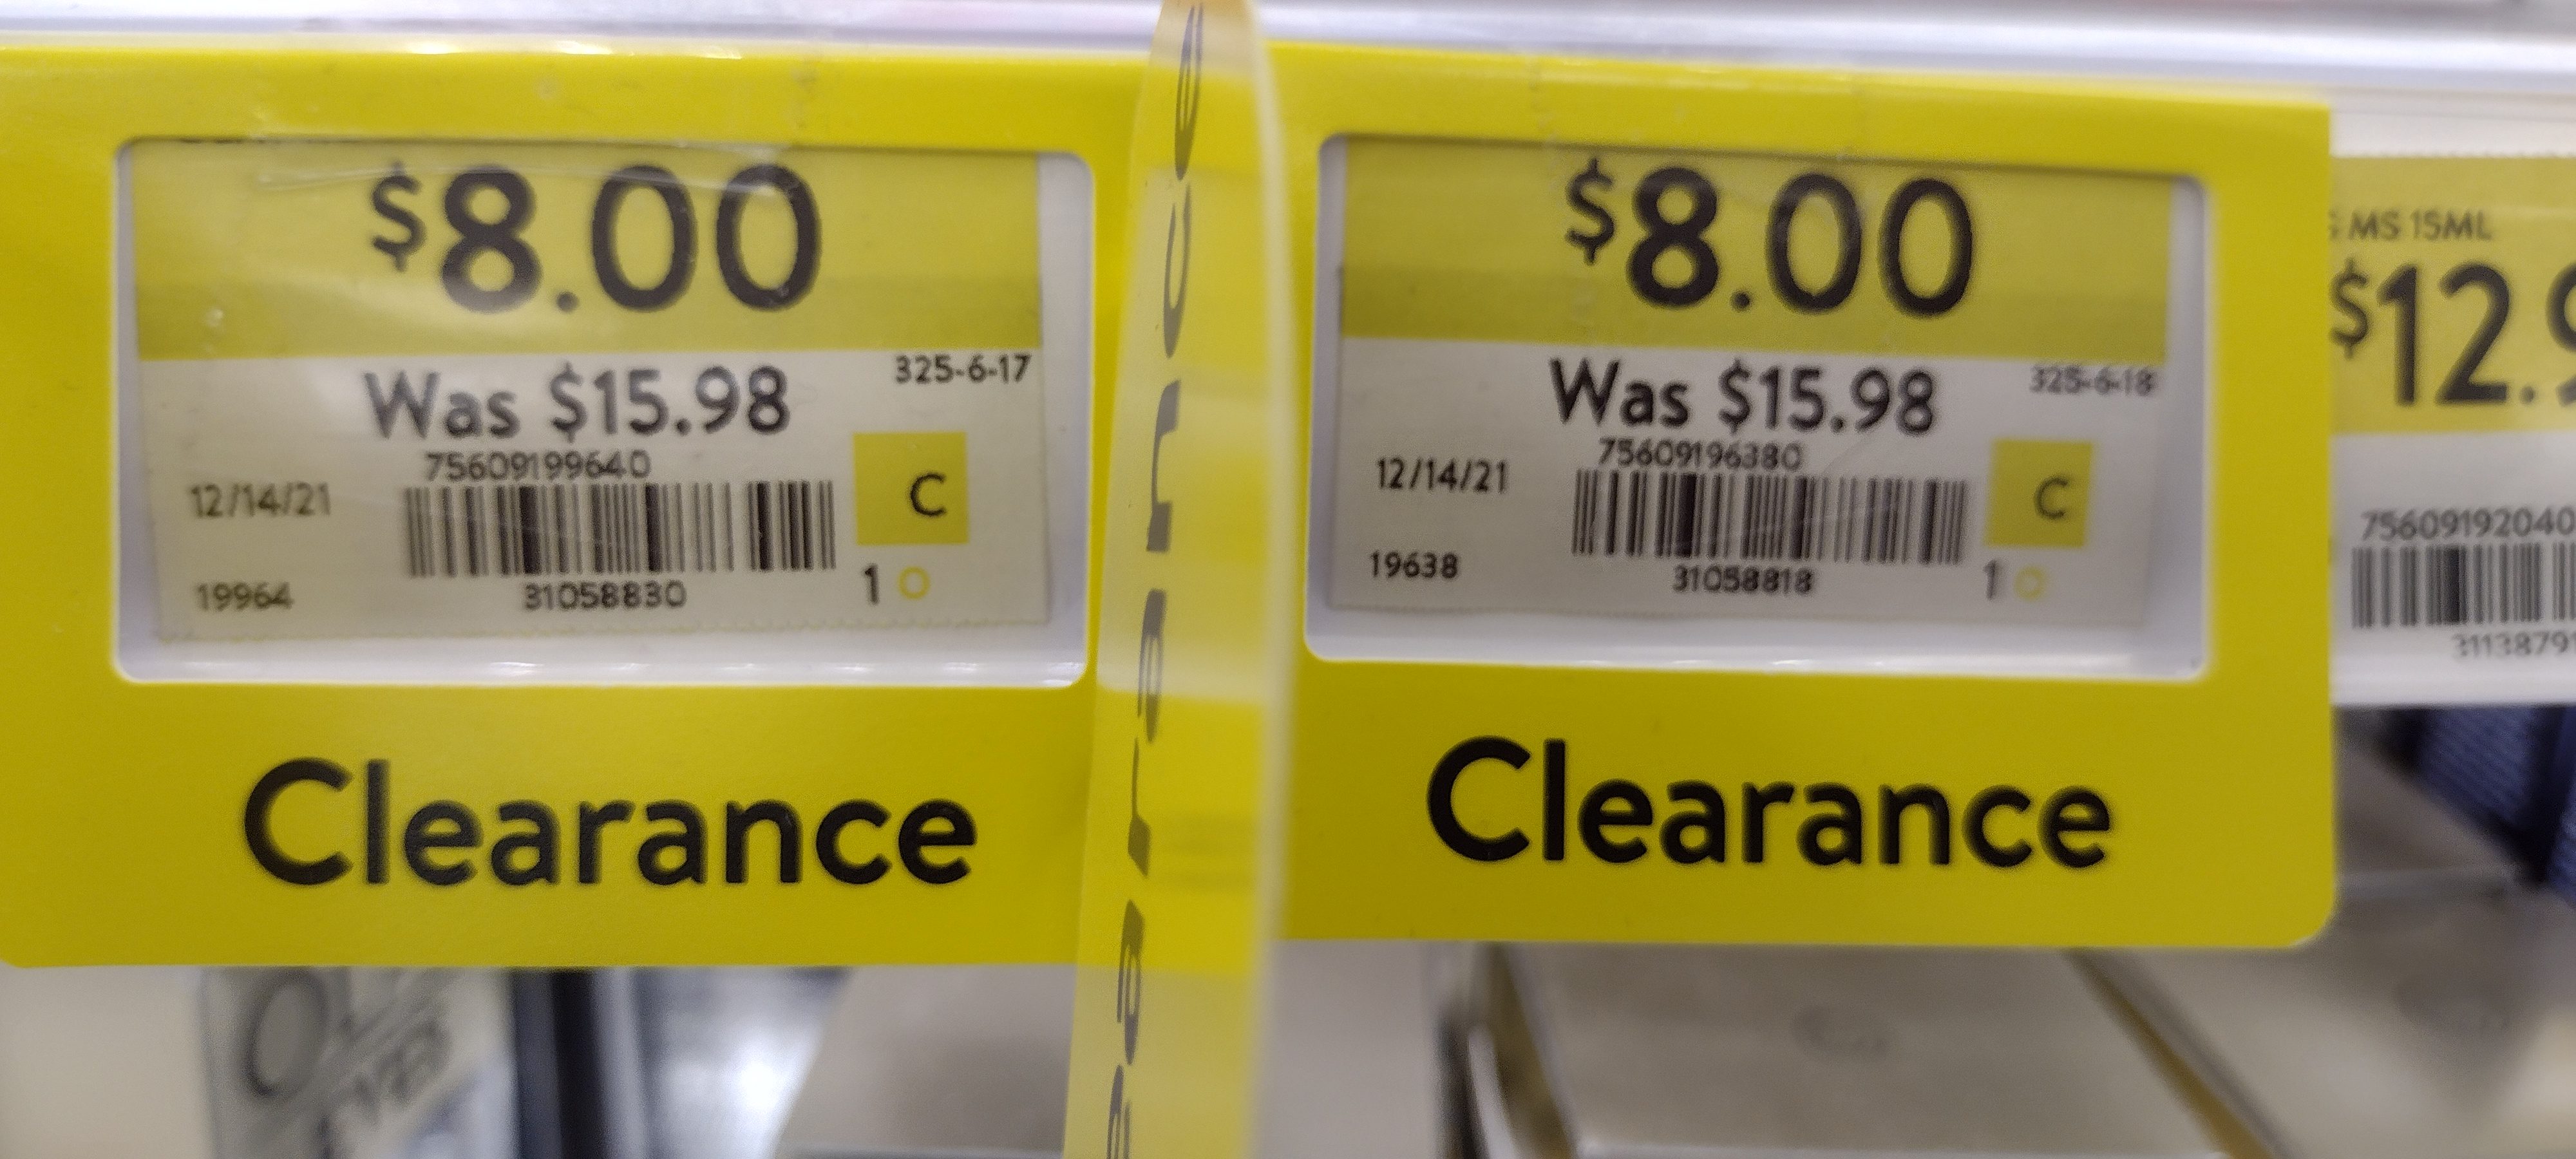 Walmart Canada Online Clearance - Canadian Freebies, Coupons